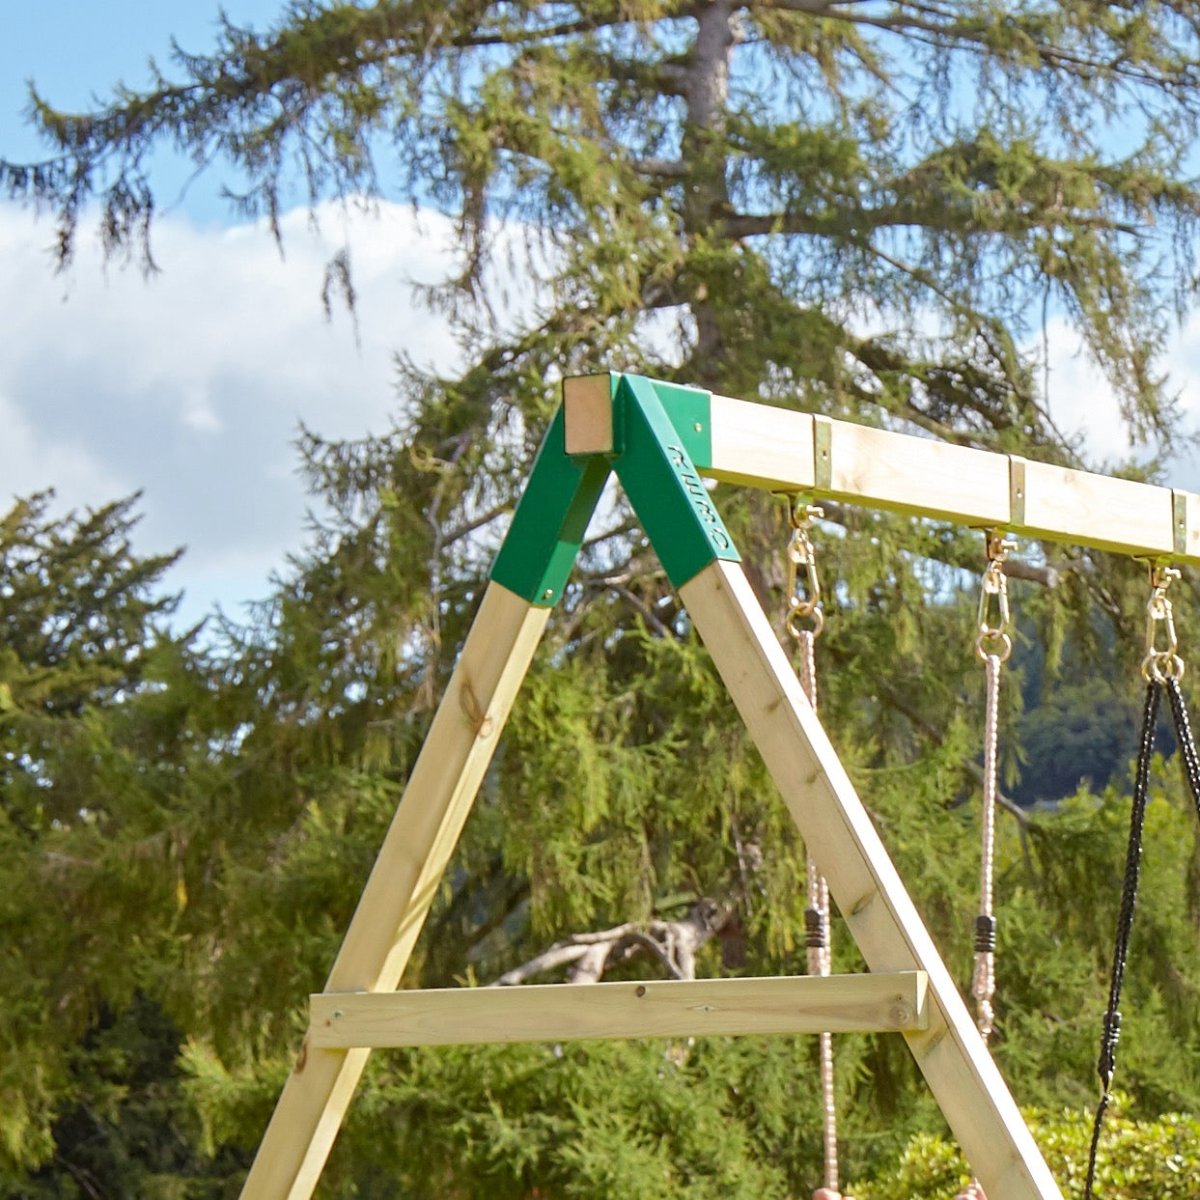 Rebo Extended Tower Wooden Climbing Frame with Swings & Slide - Arvon